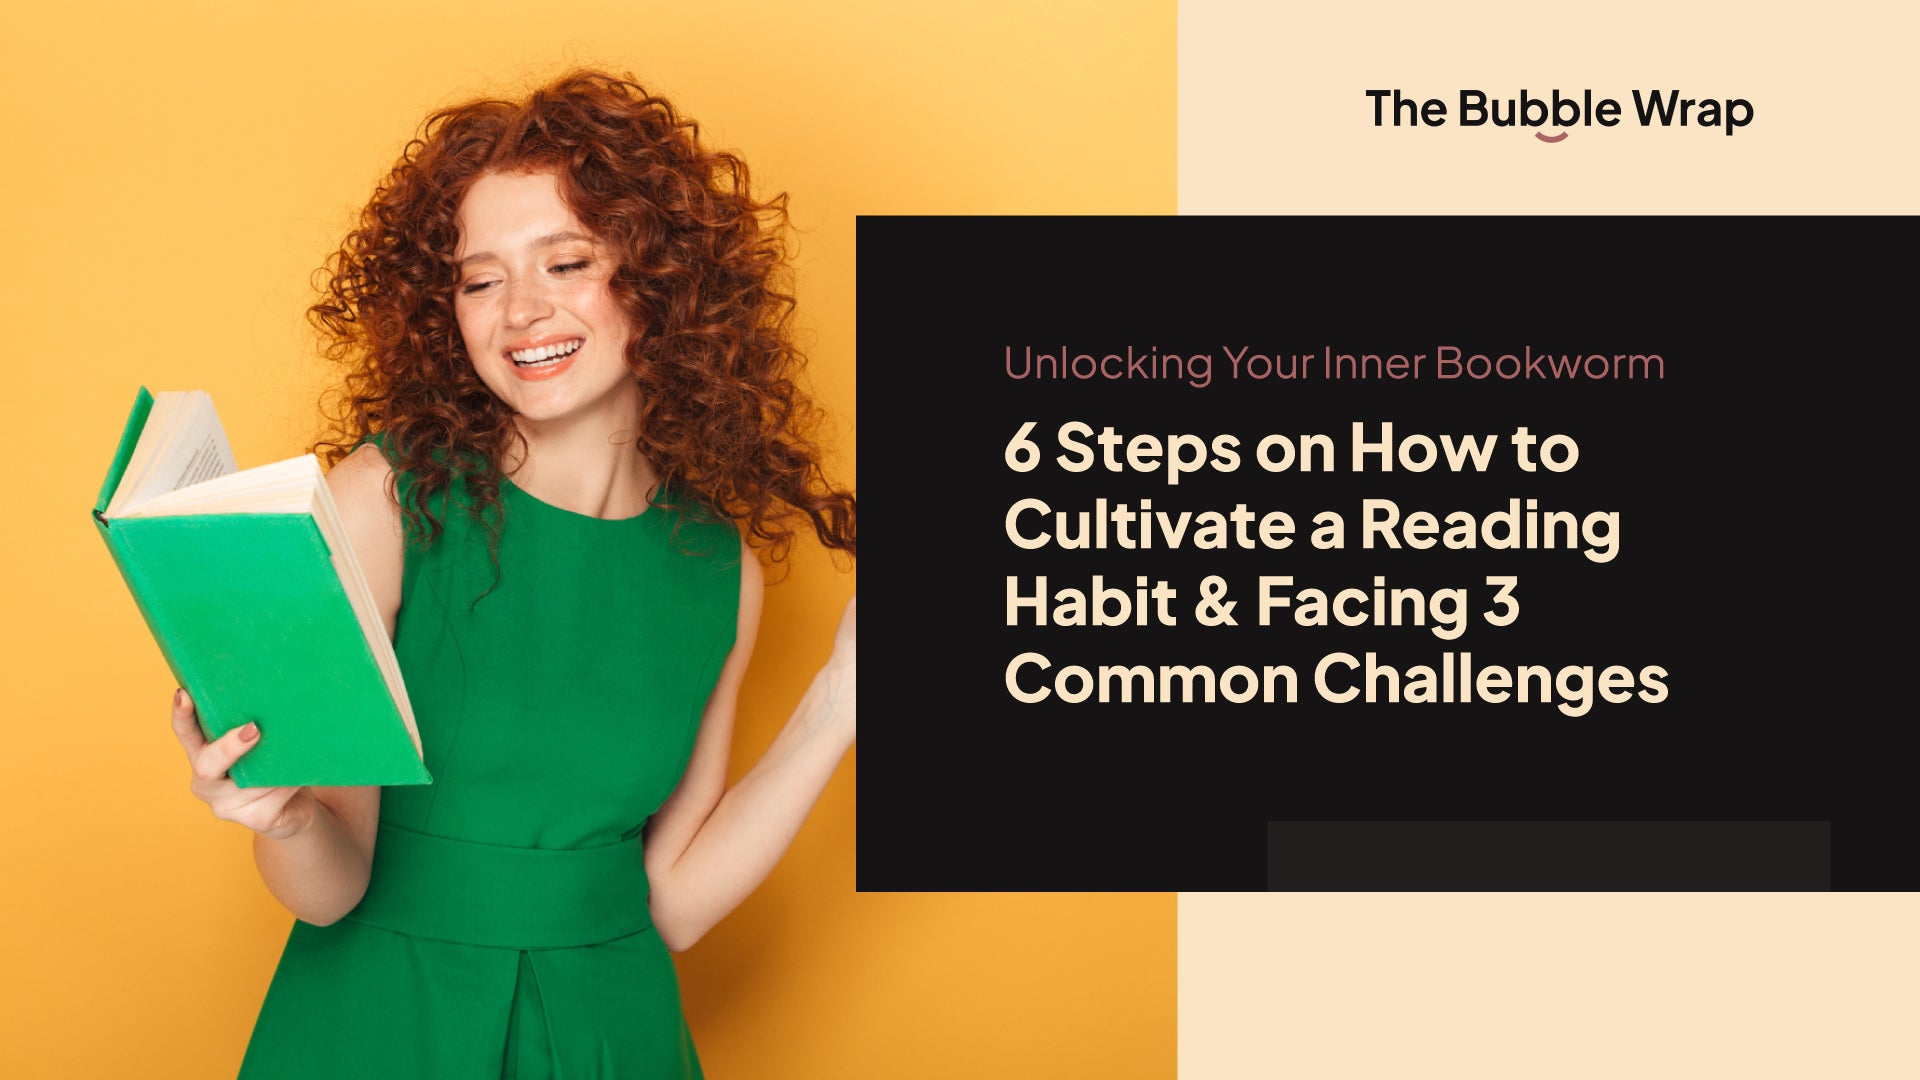 Unlocking Your Inner Bookworm: 6 Steps on How to Cultivate a Reading Habit & Facing 3 Common Challenges